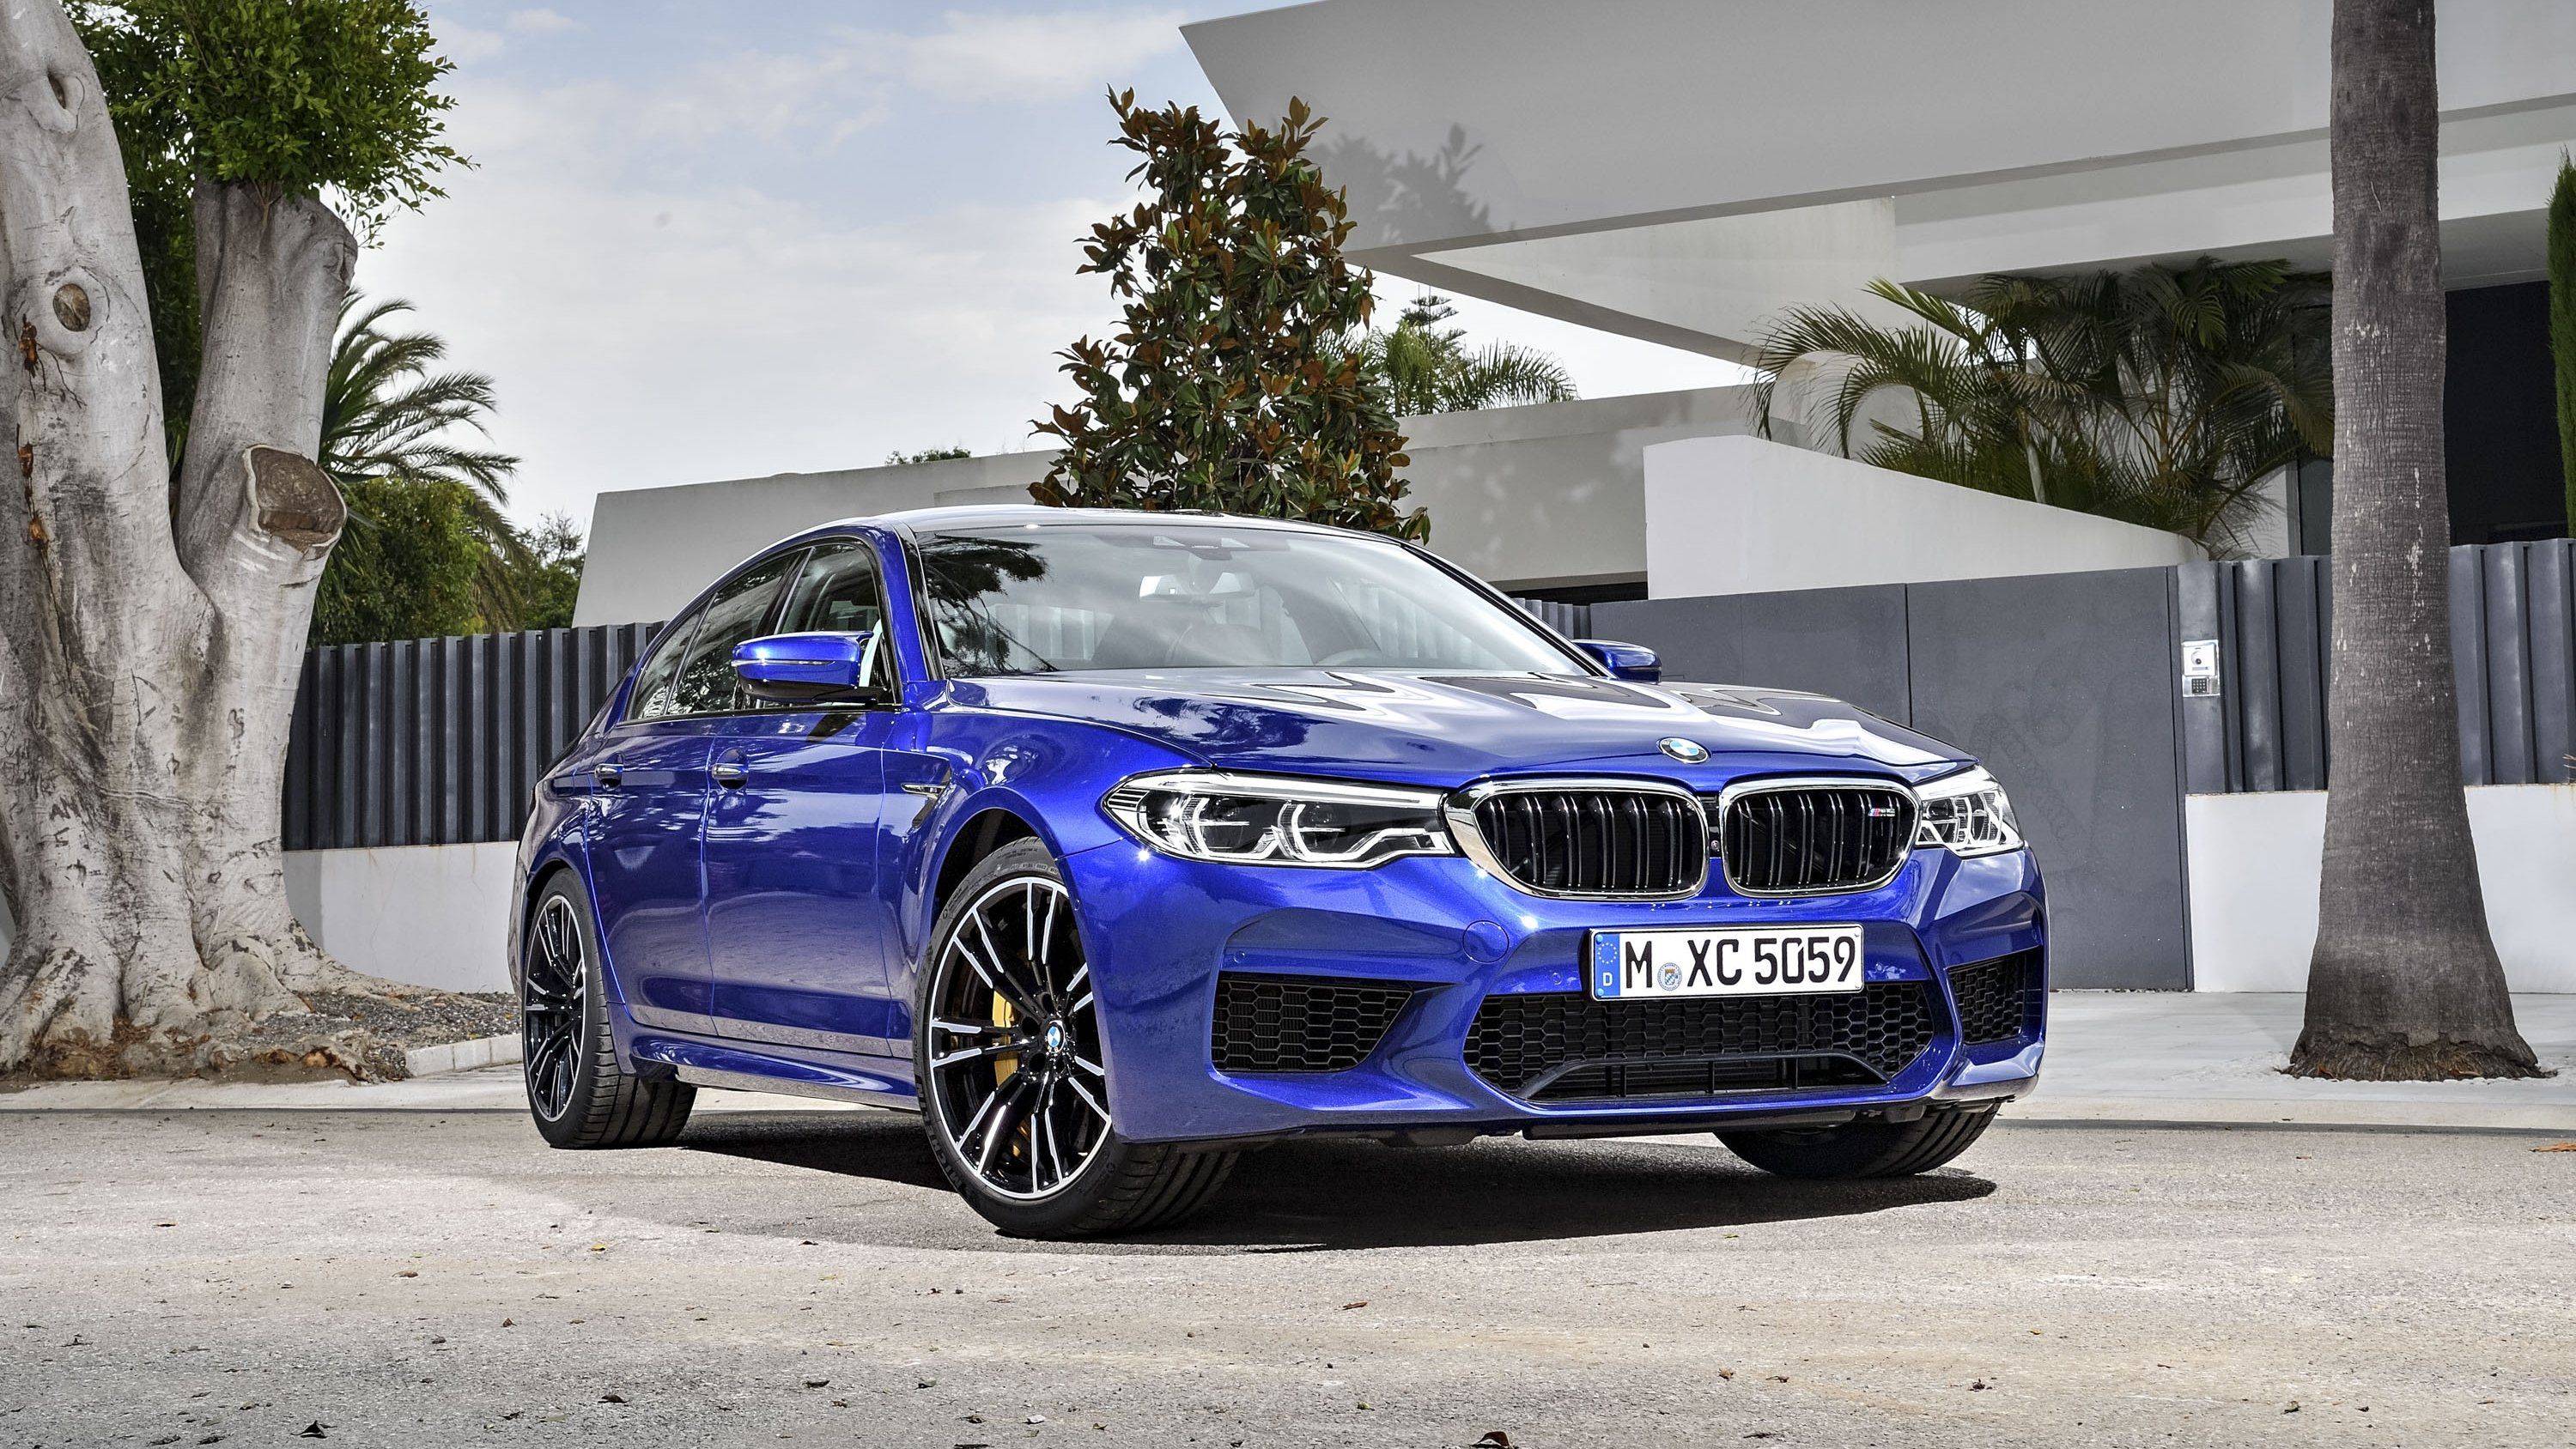 Wallpaper Of The Day: 2018 BMW M5